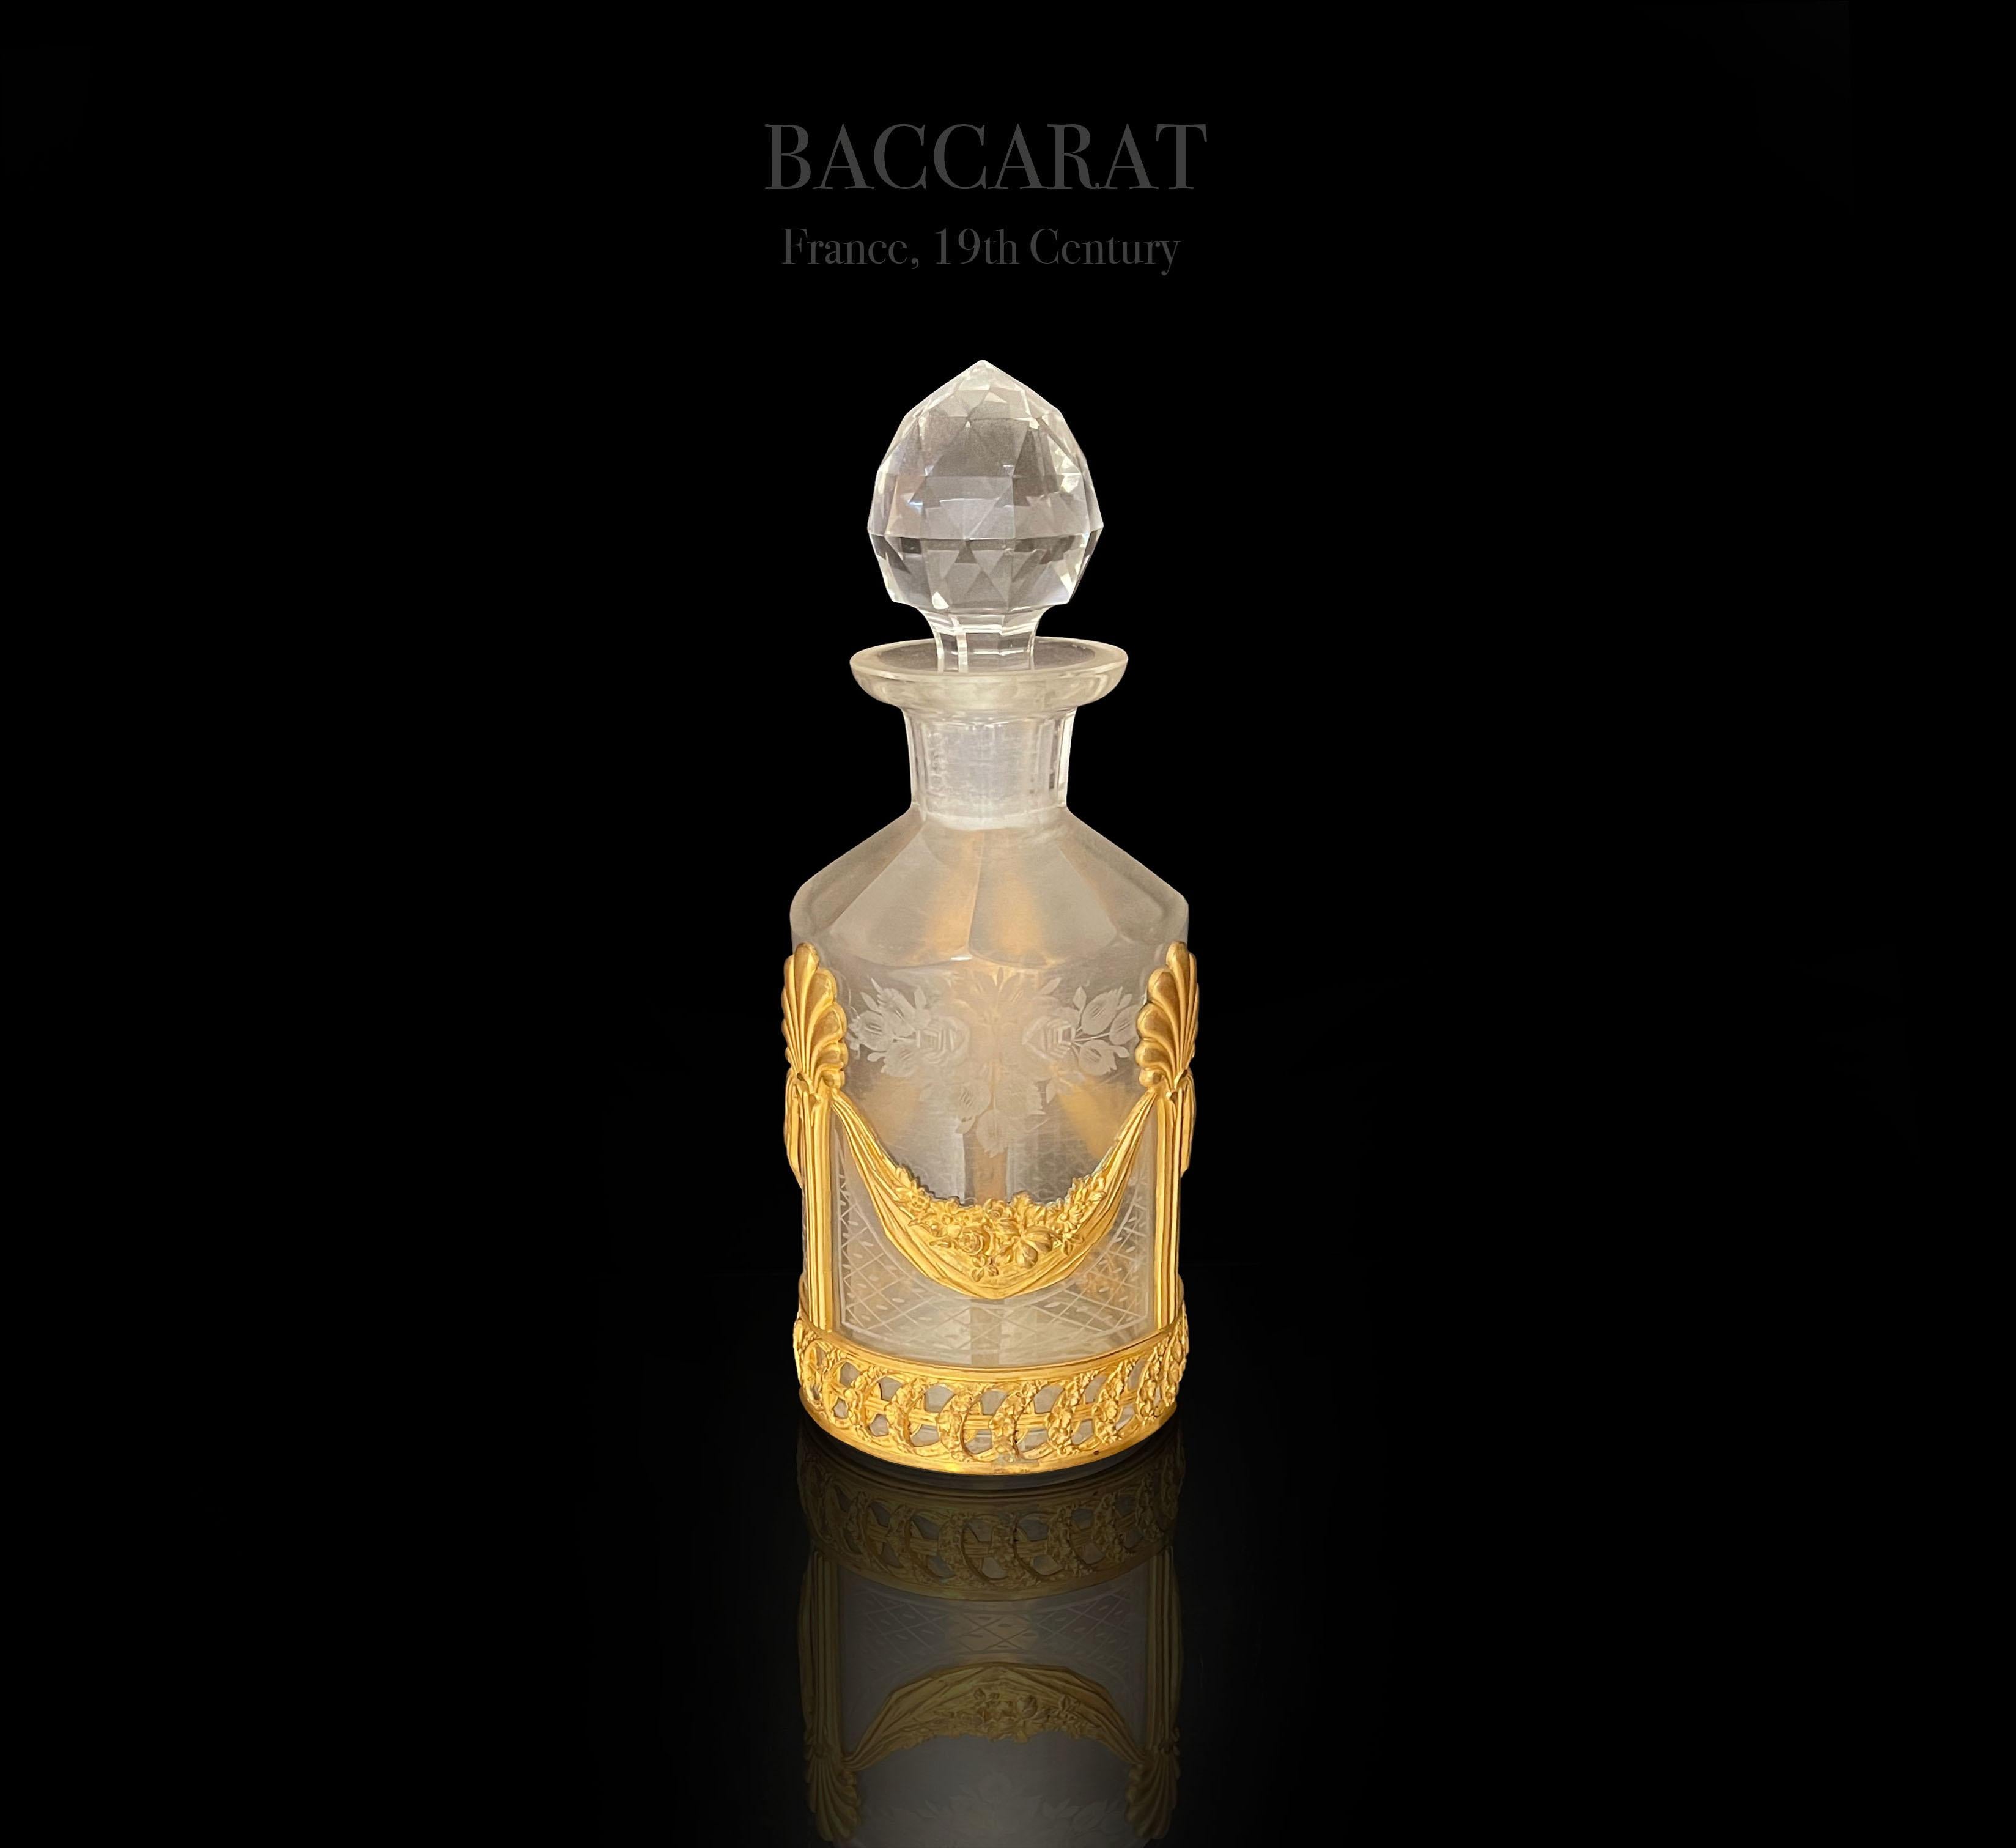 Magnificent 19th C. French Baccarat engraved crystal mounted bronze perfume bottle.


H: 8-3/4”

D: 3-1/4”

Baccarat Crystal (pronounced [baka?a]) is a French manufacturer of fine crystal located in Baccarat, France. The company owns two